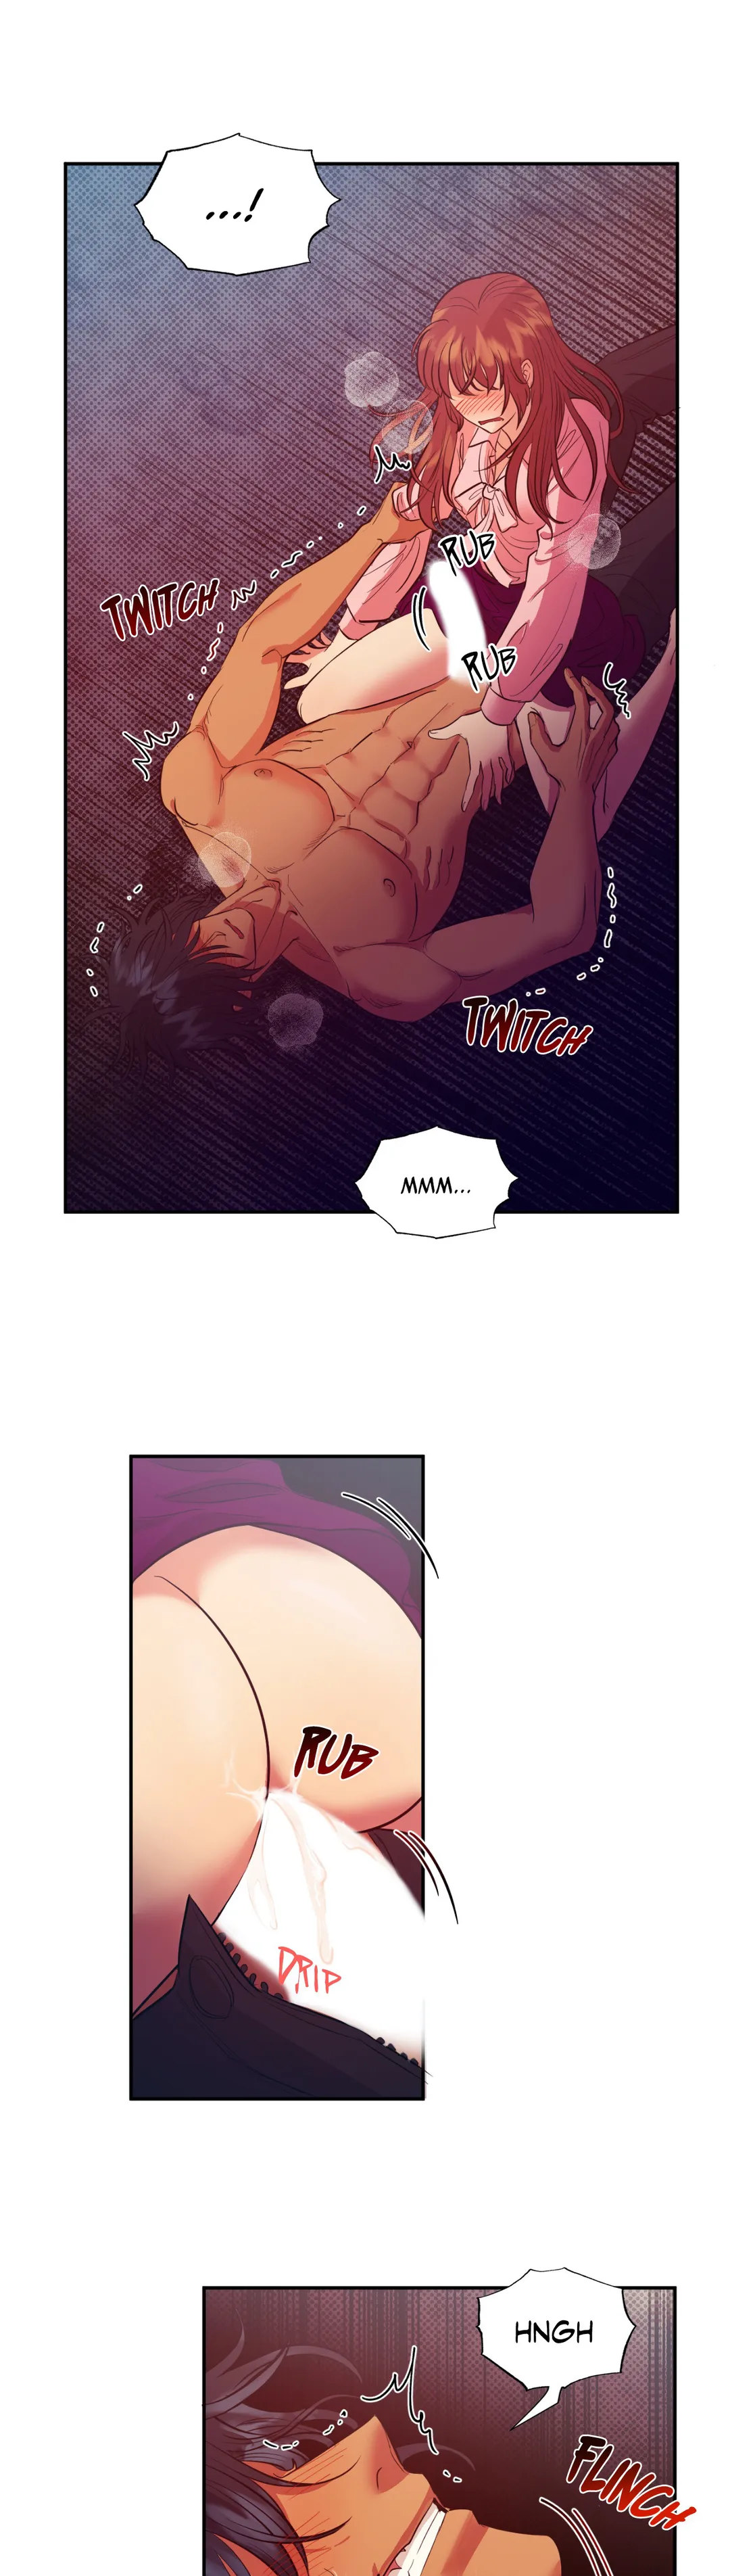 Hana’s Demons of Lust - Chapter 11 Page 17